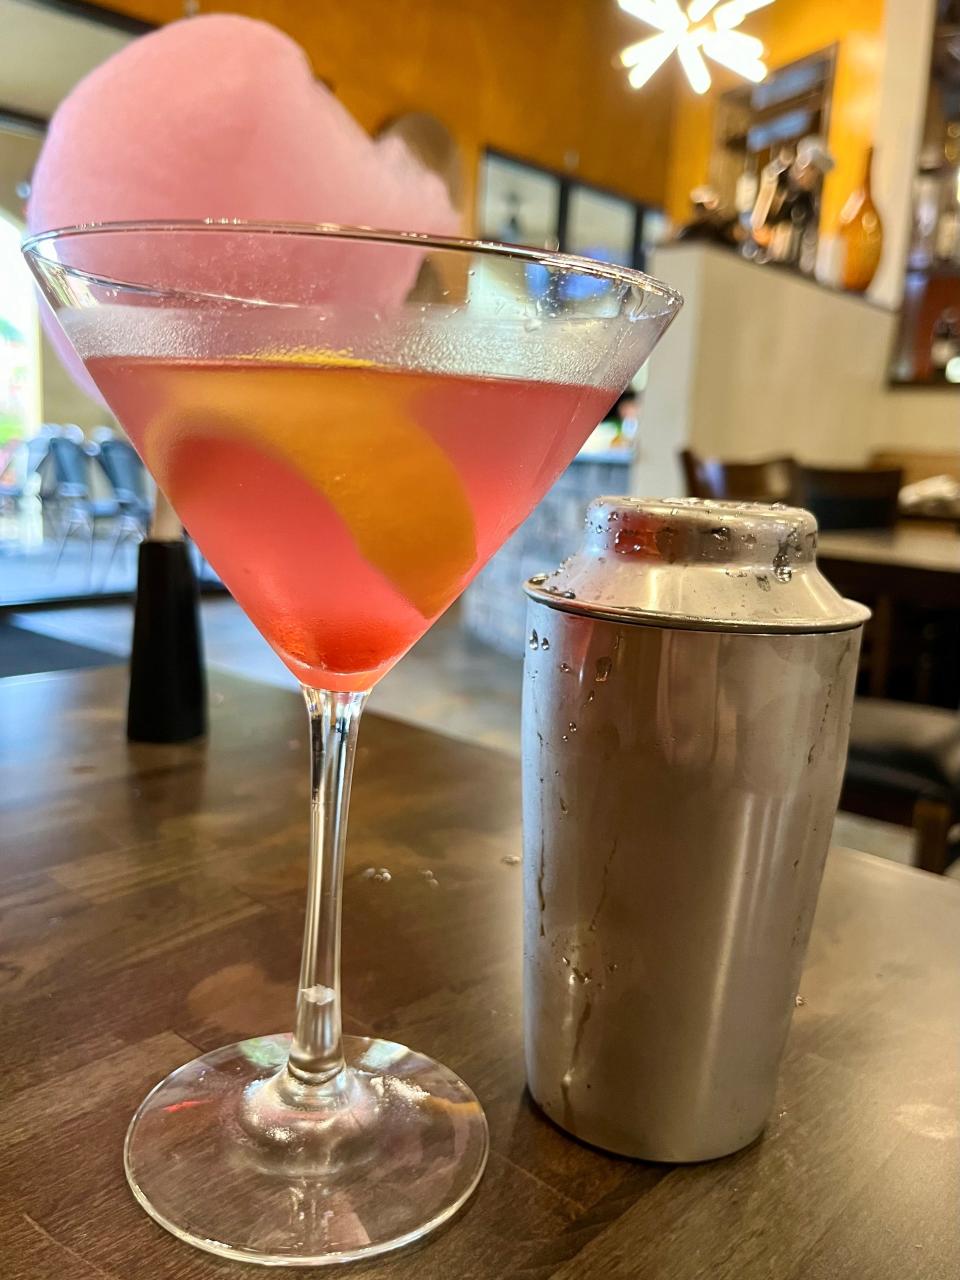 Oda Pizzeria Bistro offers creative craft cocktails including this cotton Candy cosmo.